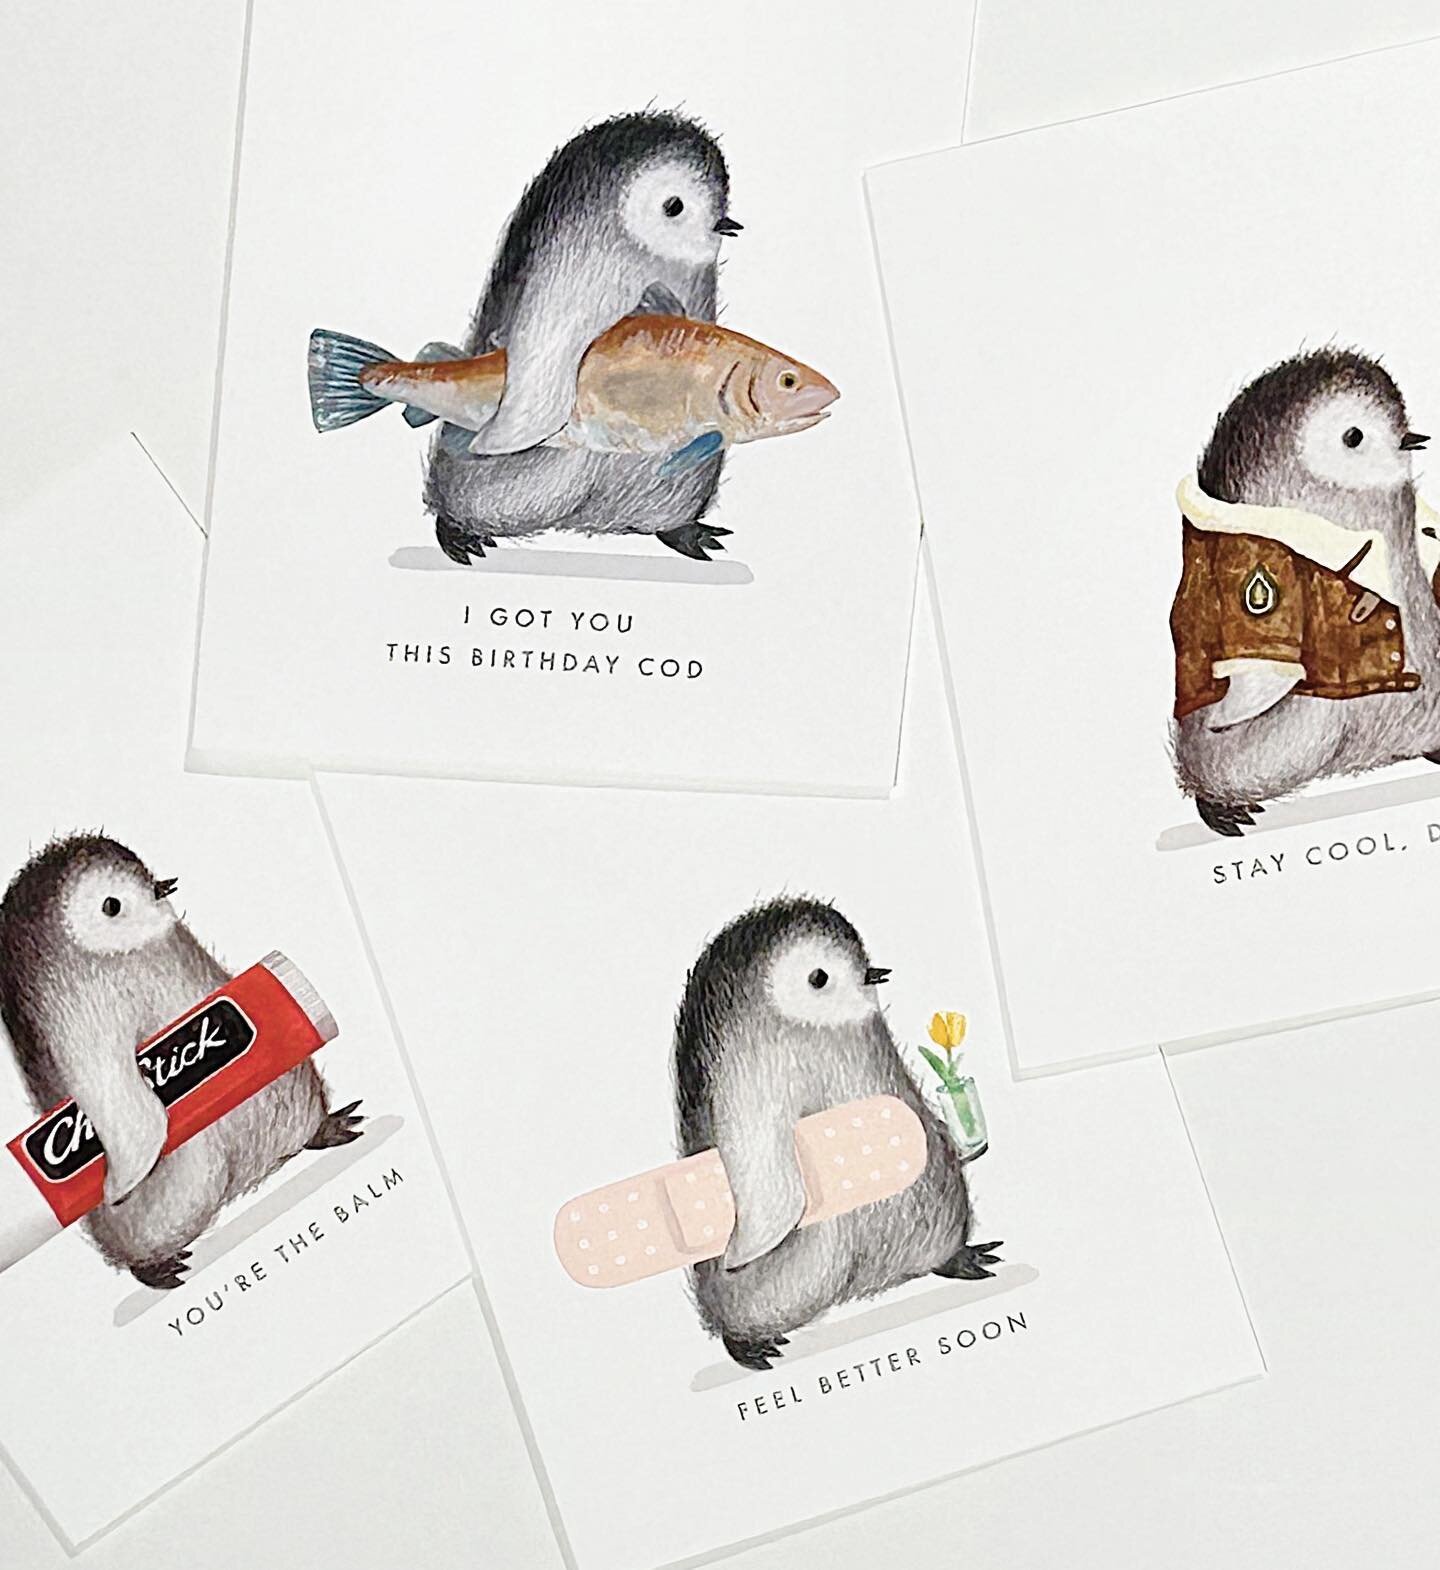 April 25th is World Penguin Day! This little graphite penguin from @dearhancock is the cutest addition to any card collection.

From holidays, birthday, well wishes and special occasions, this little guy is sure to fly off the shelves!

Visit danrich